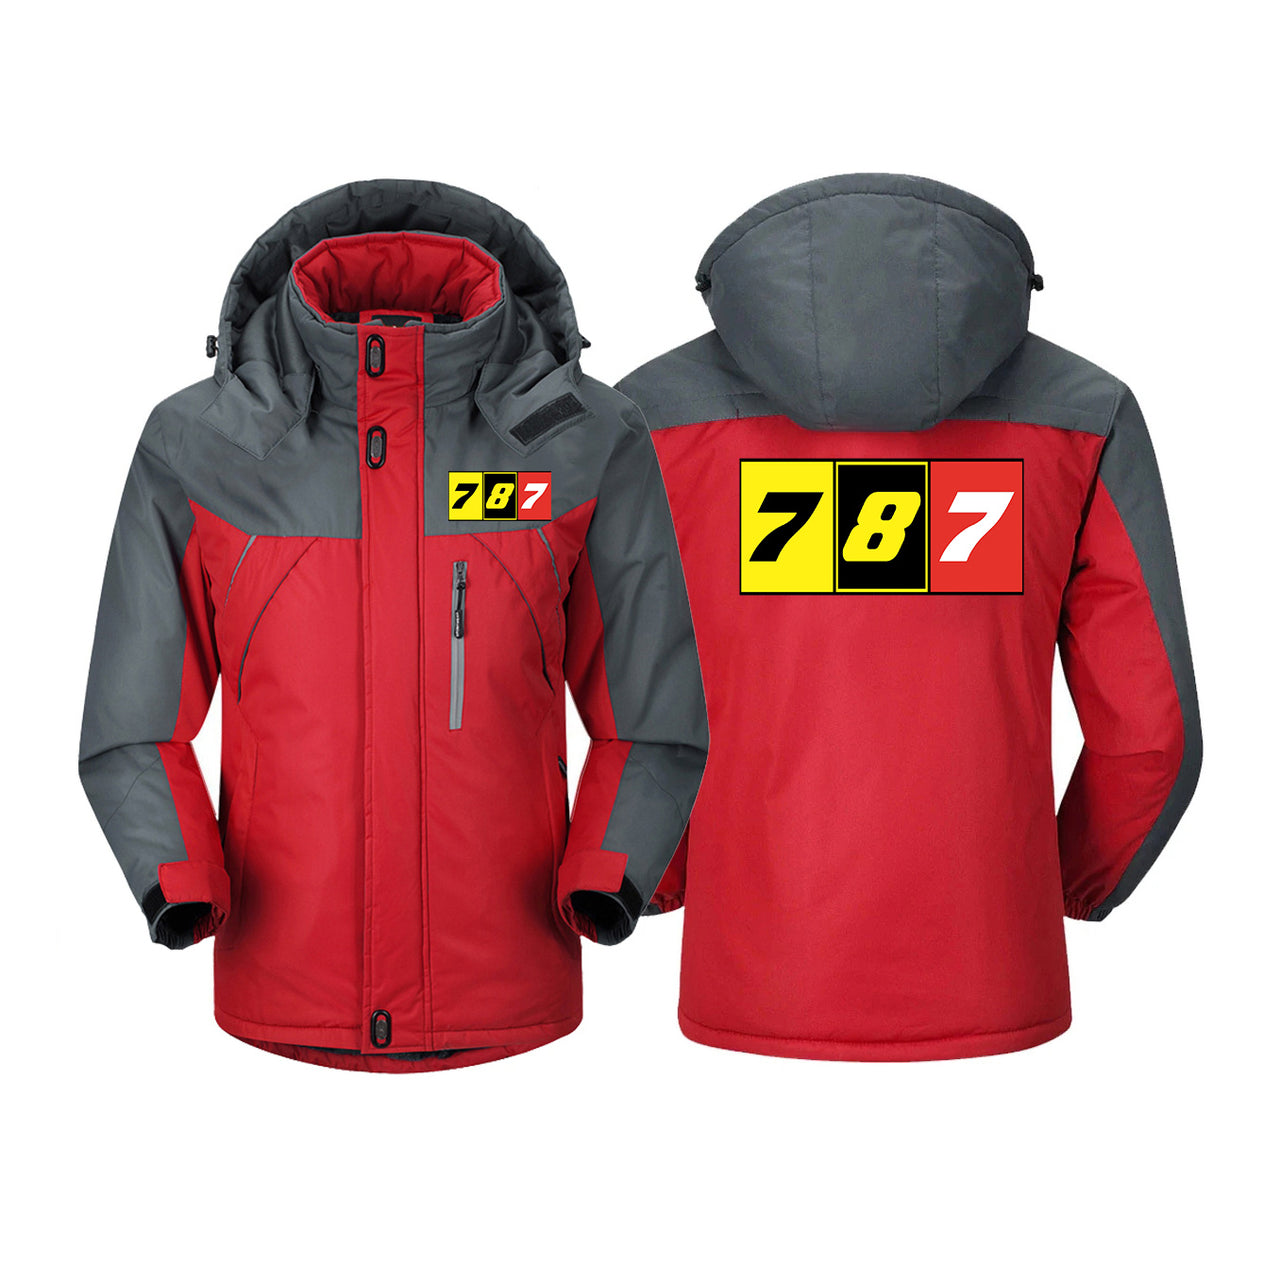 Flat Colourful 787 Designed Thick Winter Jackets